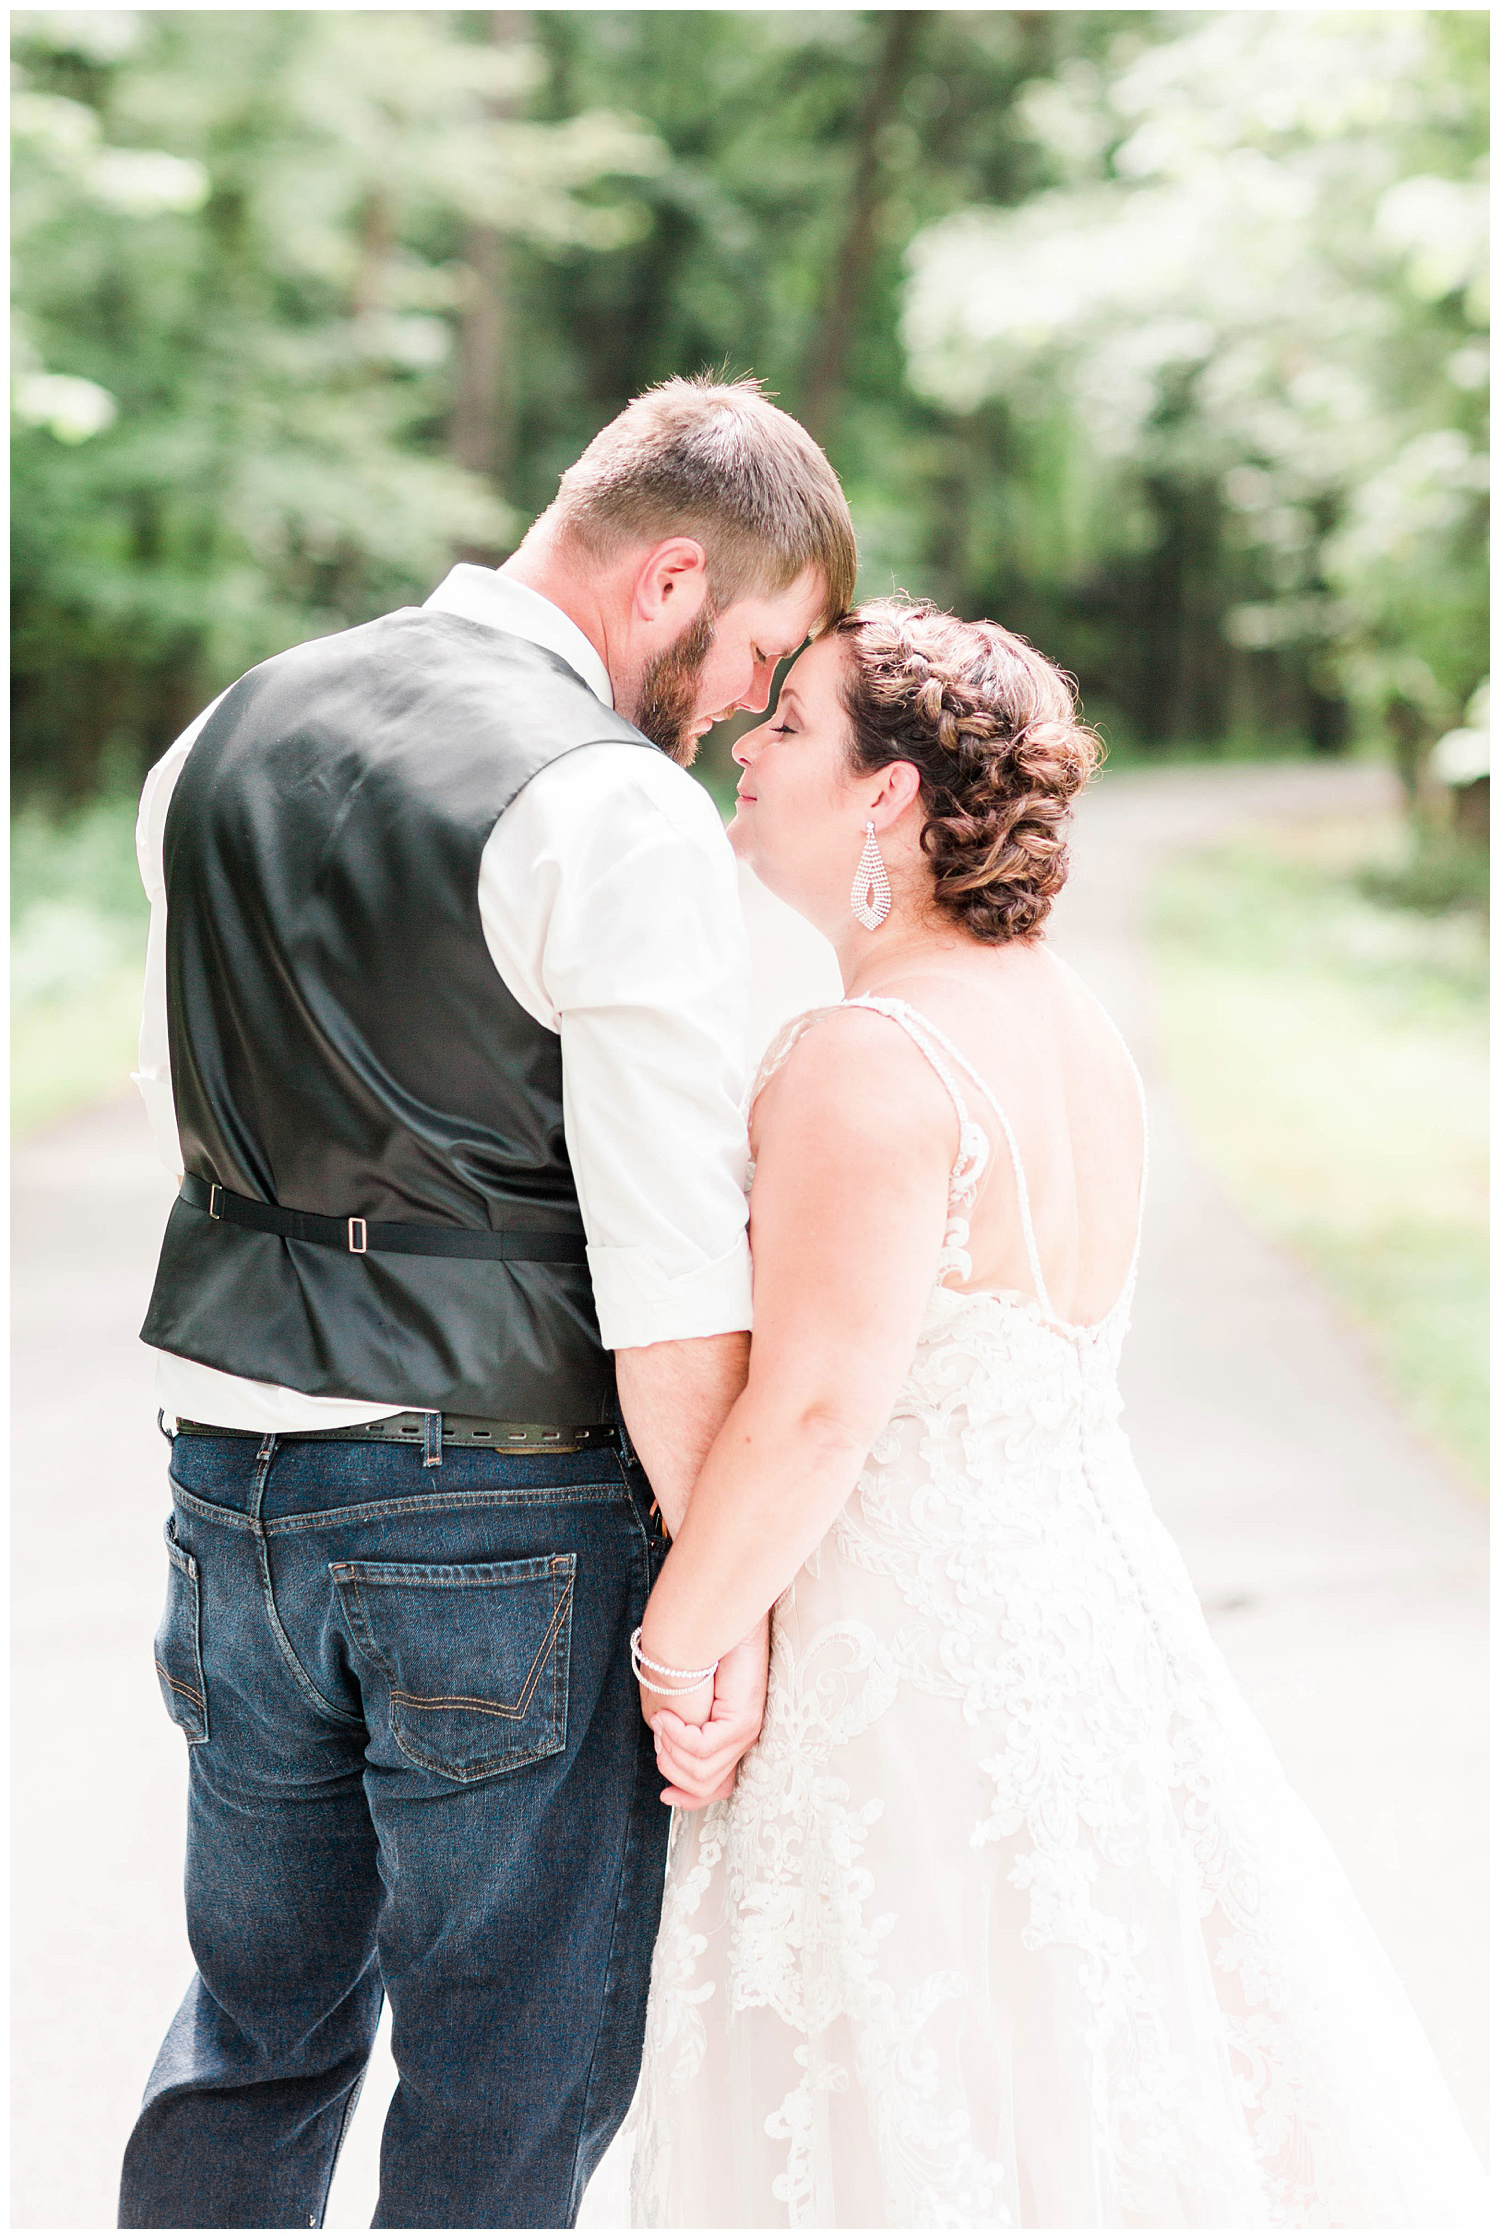 Travis gently nuzzles his new bride in the middle of a forest pathway | Iowa Wedding Photographer